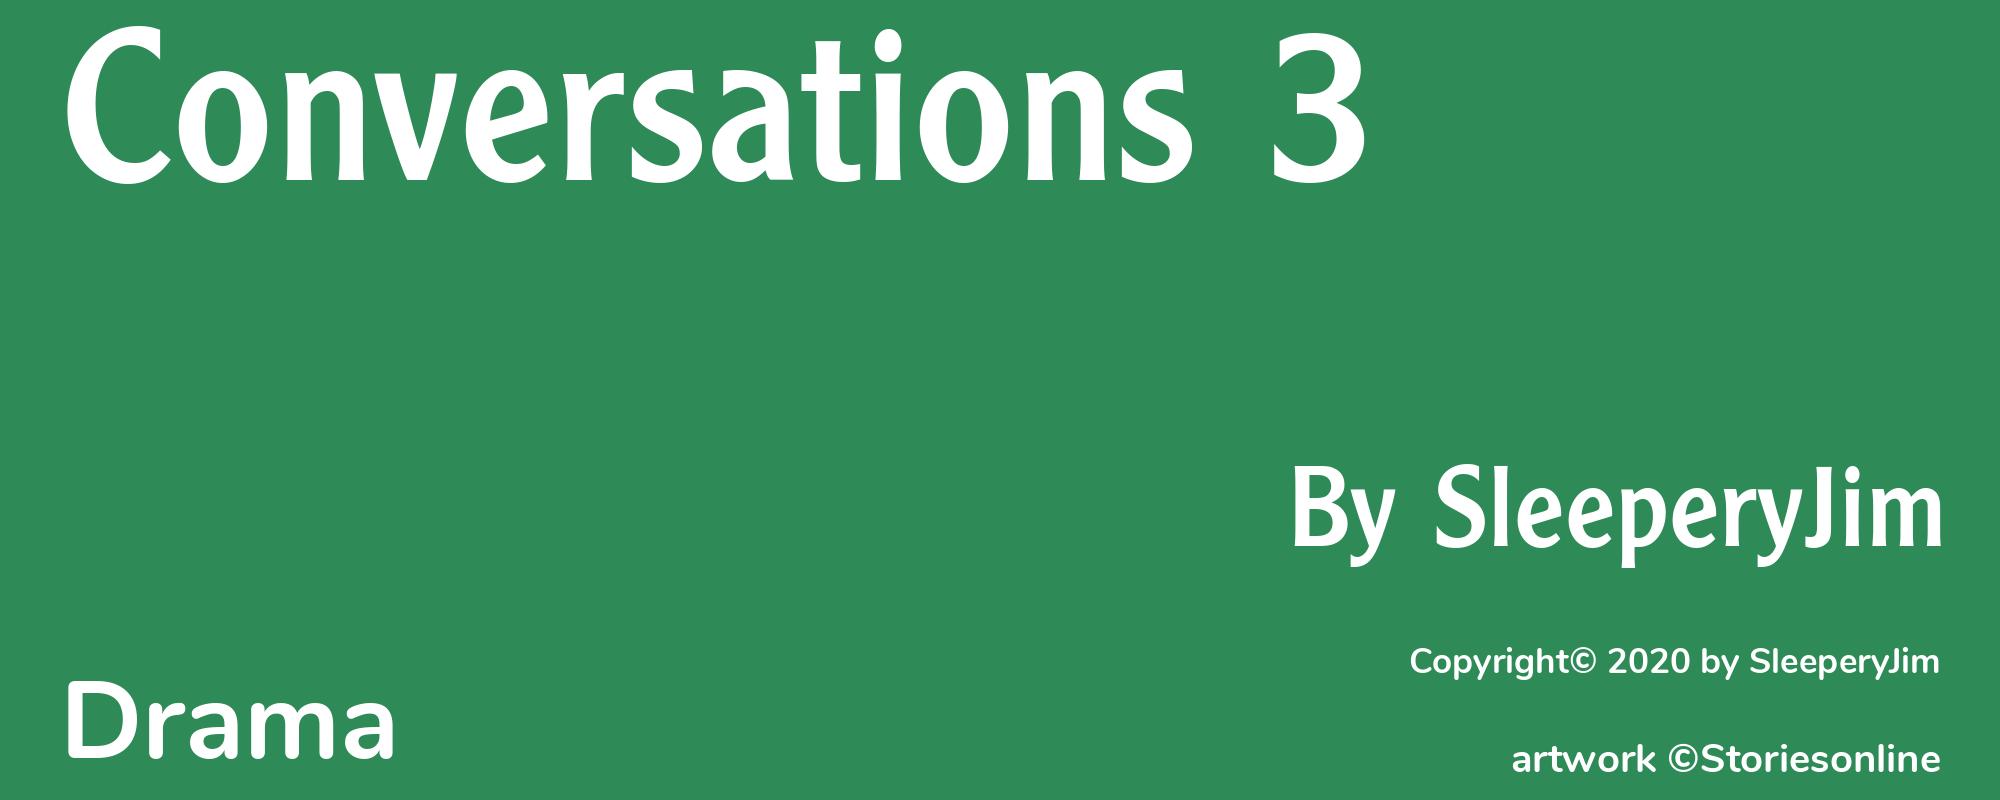 Conversations 3 - Cover